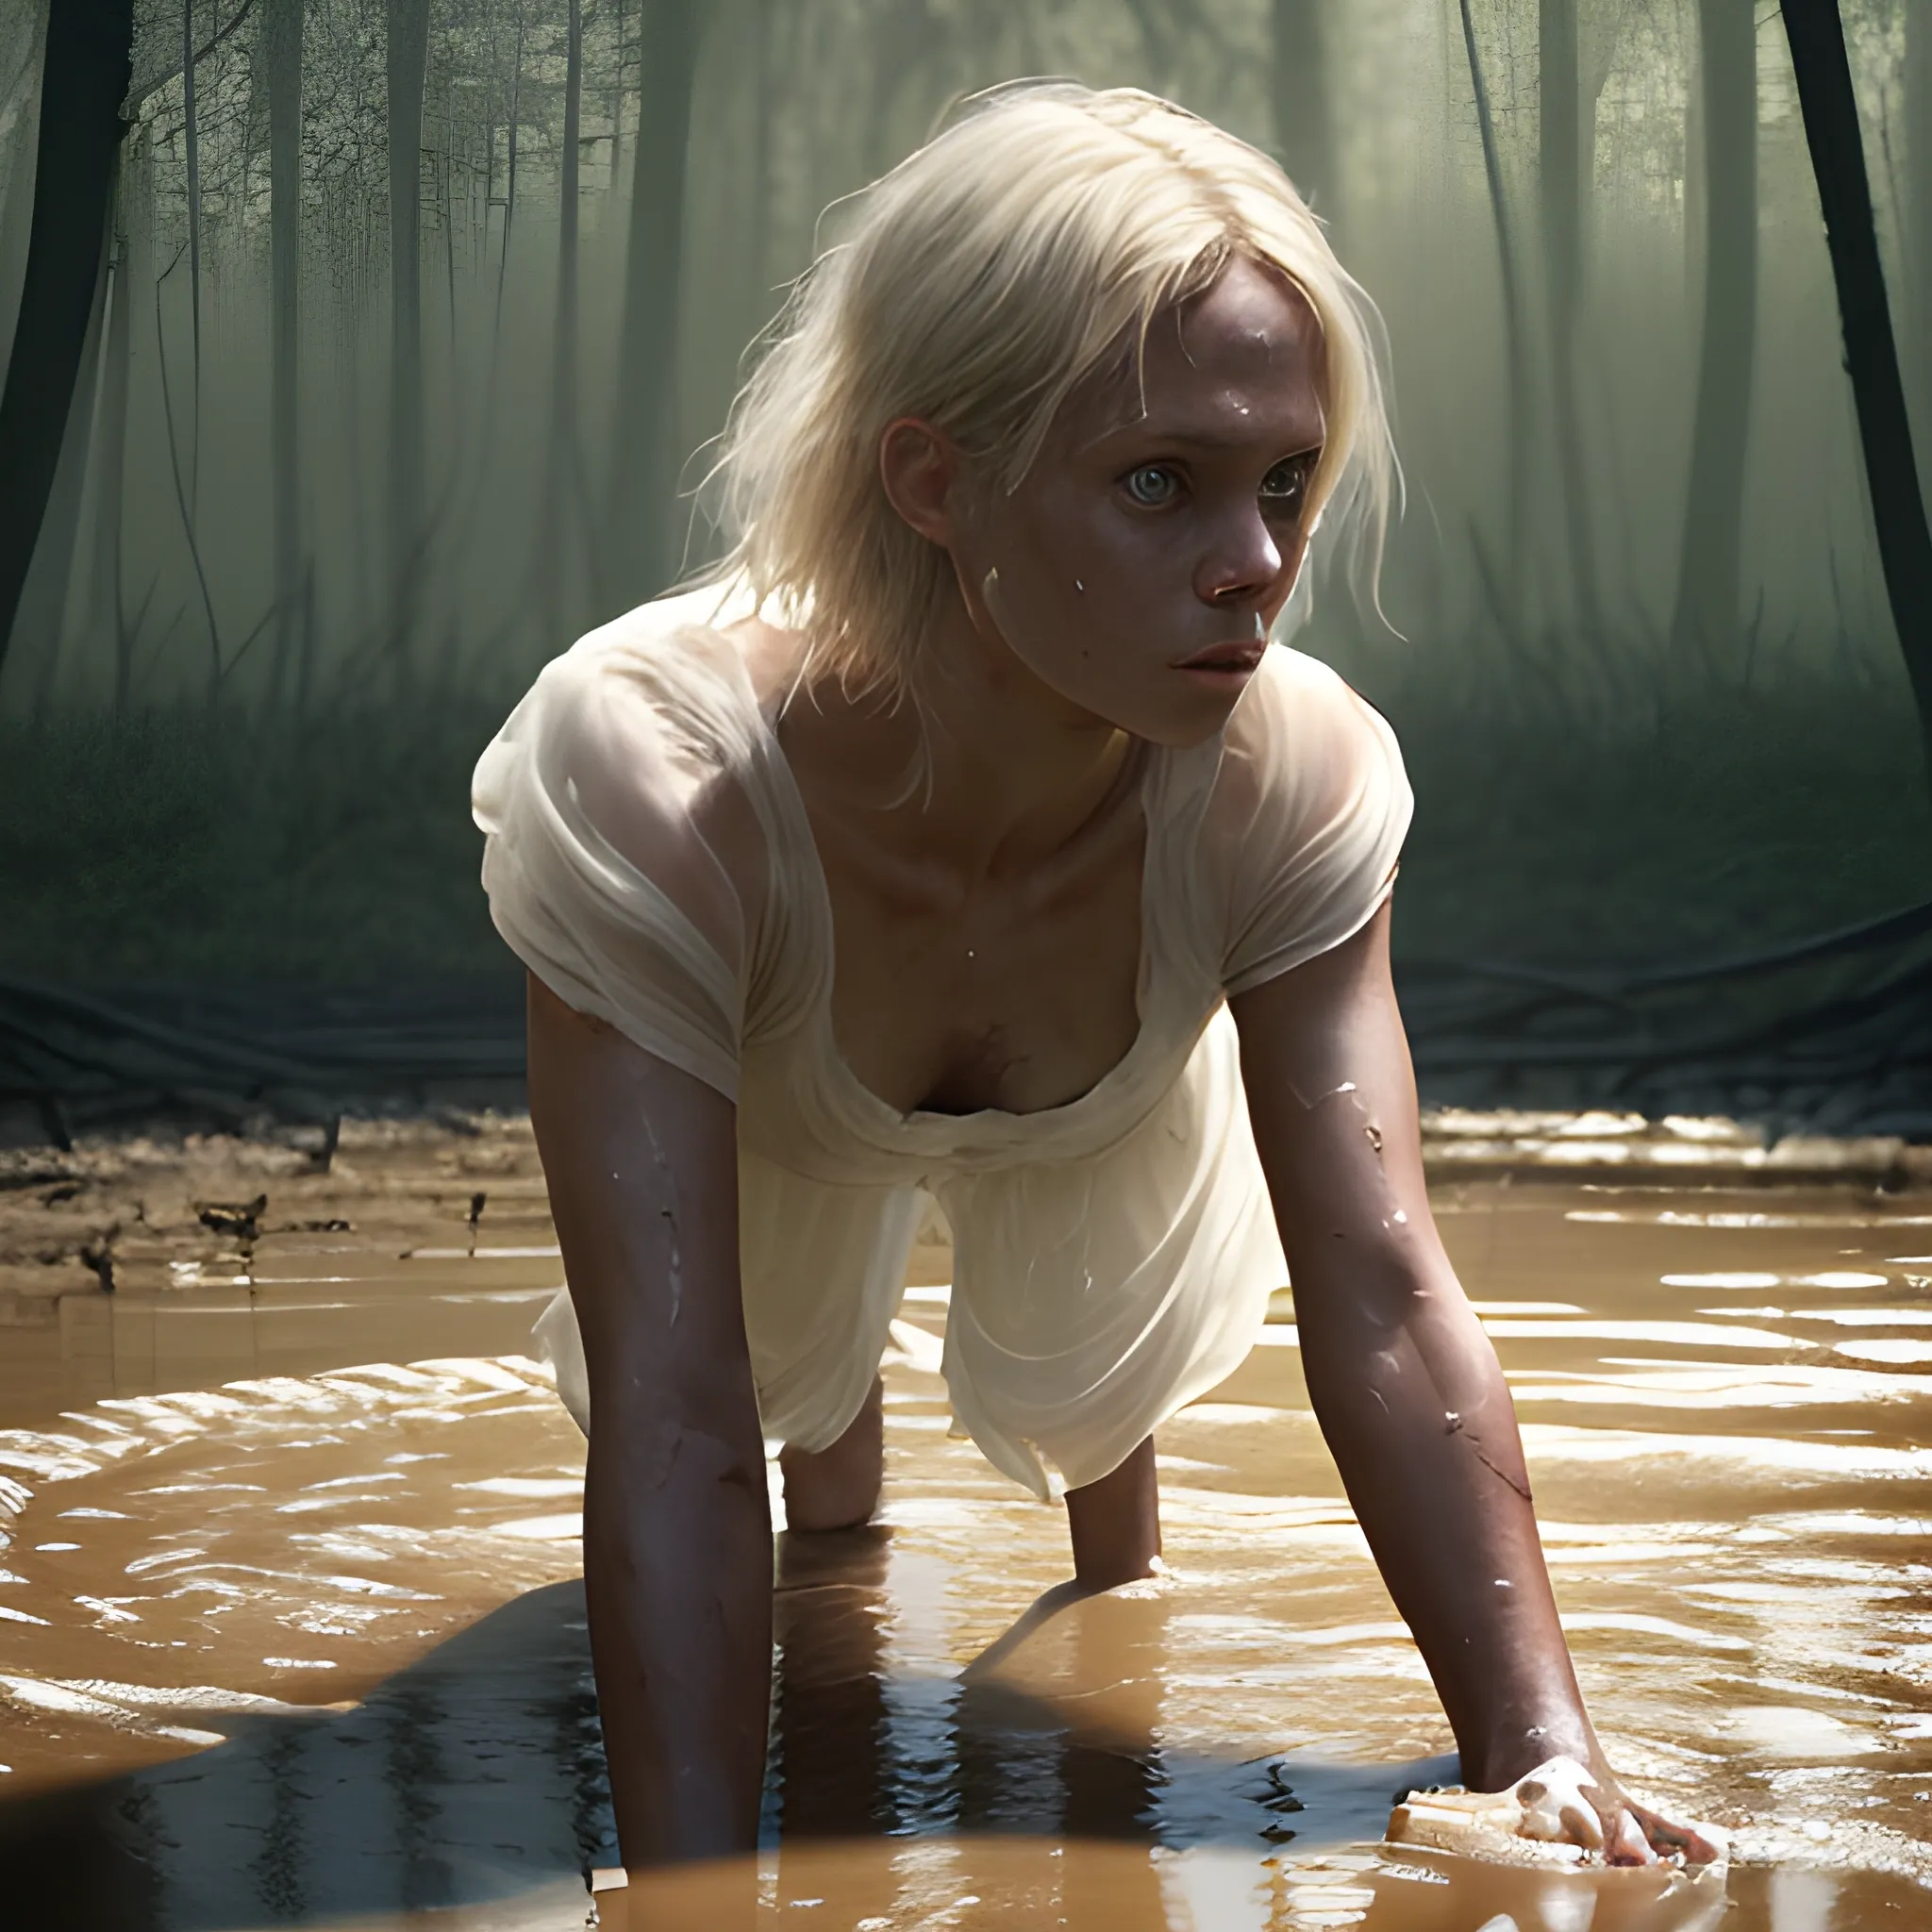 A fair-skinned woman, crawling slowly out of the muddy swamp, in a dark, late-afternoon setting, with few rays of sunlight breaking through the trees. Her blond hair, short and damp, falls over her face as she struggles to get free. Wearing delicately soiled white silk shorts and a sheer white silk top, the ambient light reveals the sheer texture of the fabric in contrast to her skin. Soft light tones enhance her figure, while dancing shadows add a dramatic touch to the scene. Every detail is rendered hyper-realistically, capturing the beauty and intensity of the moment. The image is a cinematic masterpiece, with high resolution, vibrant colors and high contrast, providing an immersive visual experience in 8k, HDR and 500px. Created by Koos Roos